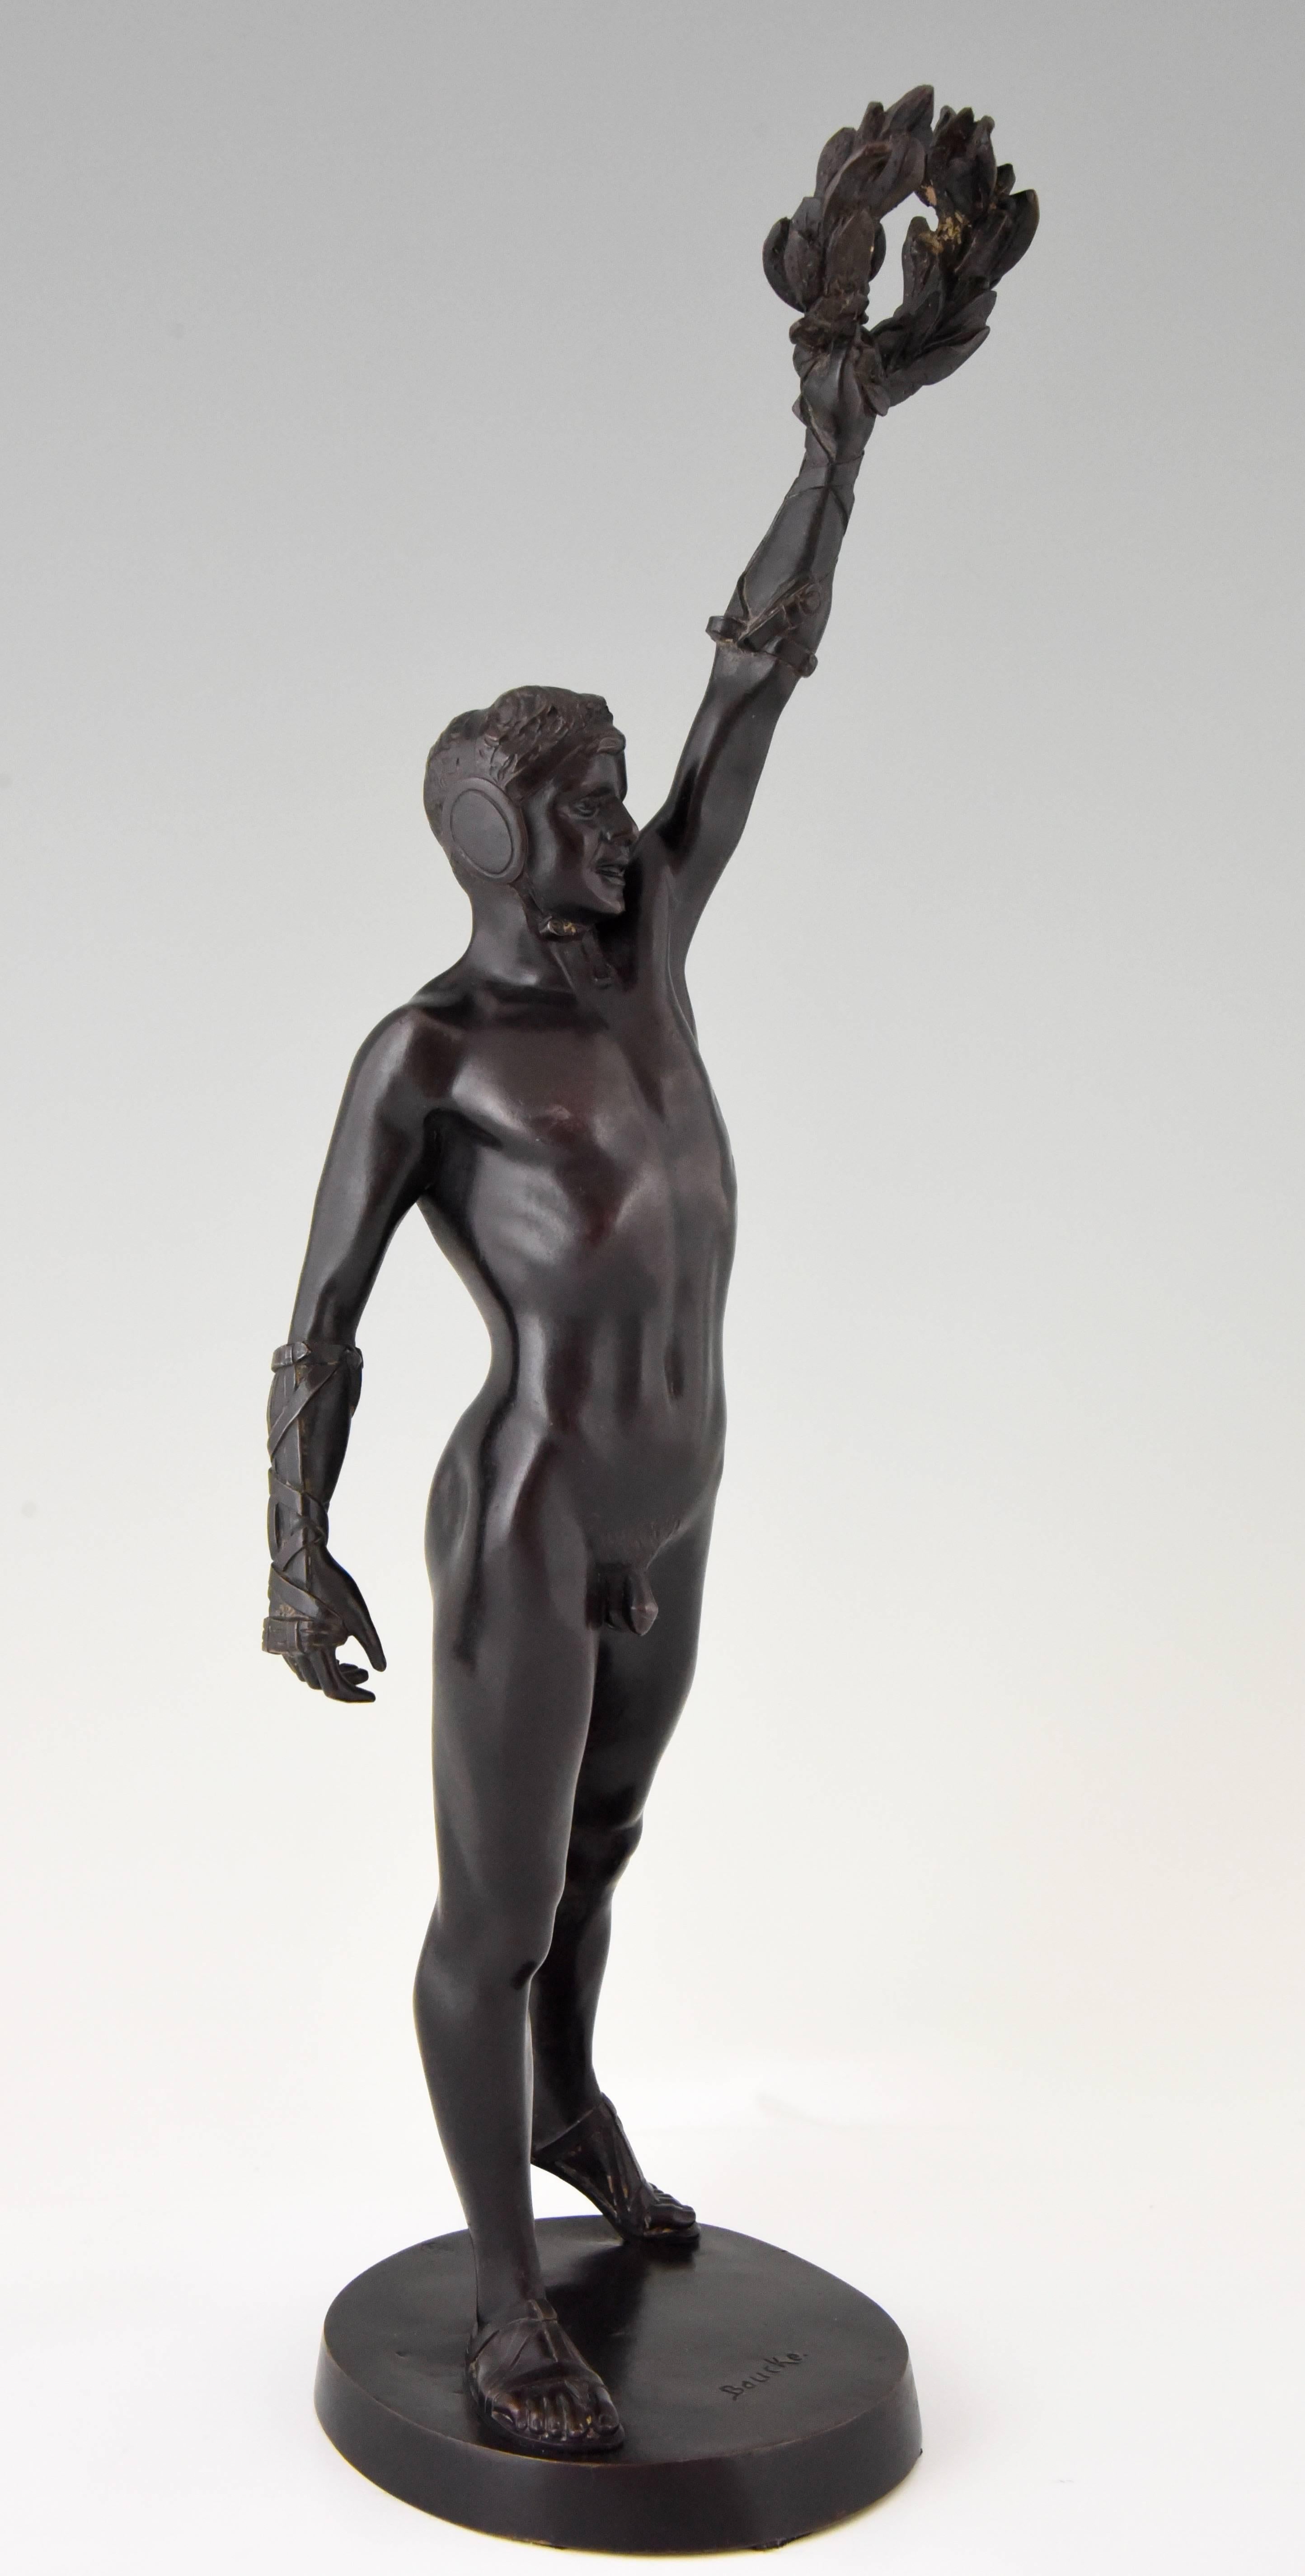 The Victorious Boxer, antique bronze sculpture male nude boxer with laurel wreath by Heinrich Baucke. 

Heinrich Baucke, born in Germany in 1875, died in 1915.
This bronze is also in the collection of the Berlin and in the Kunsthalle in